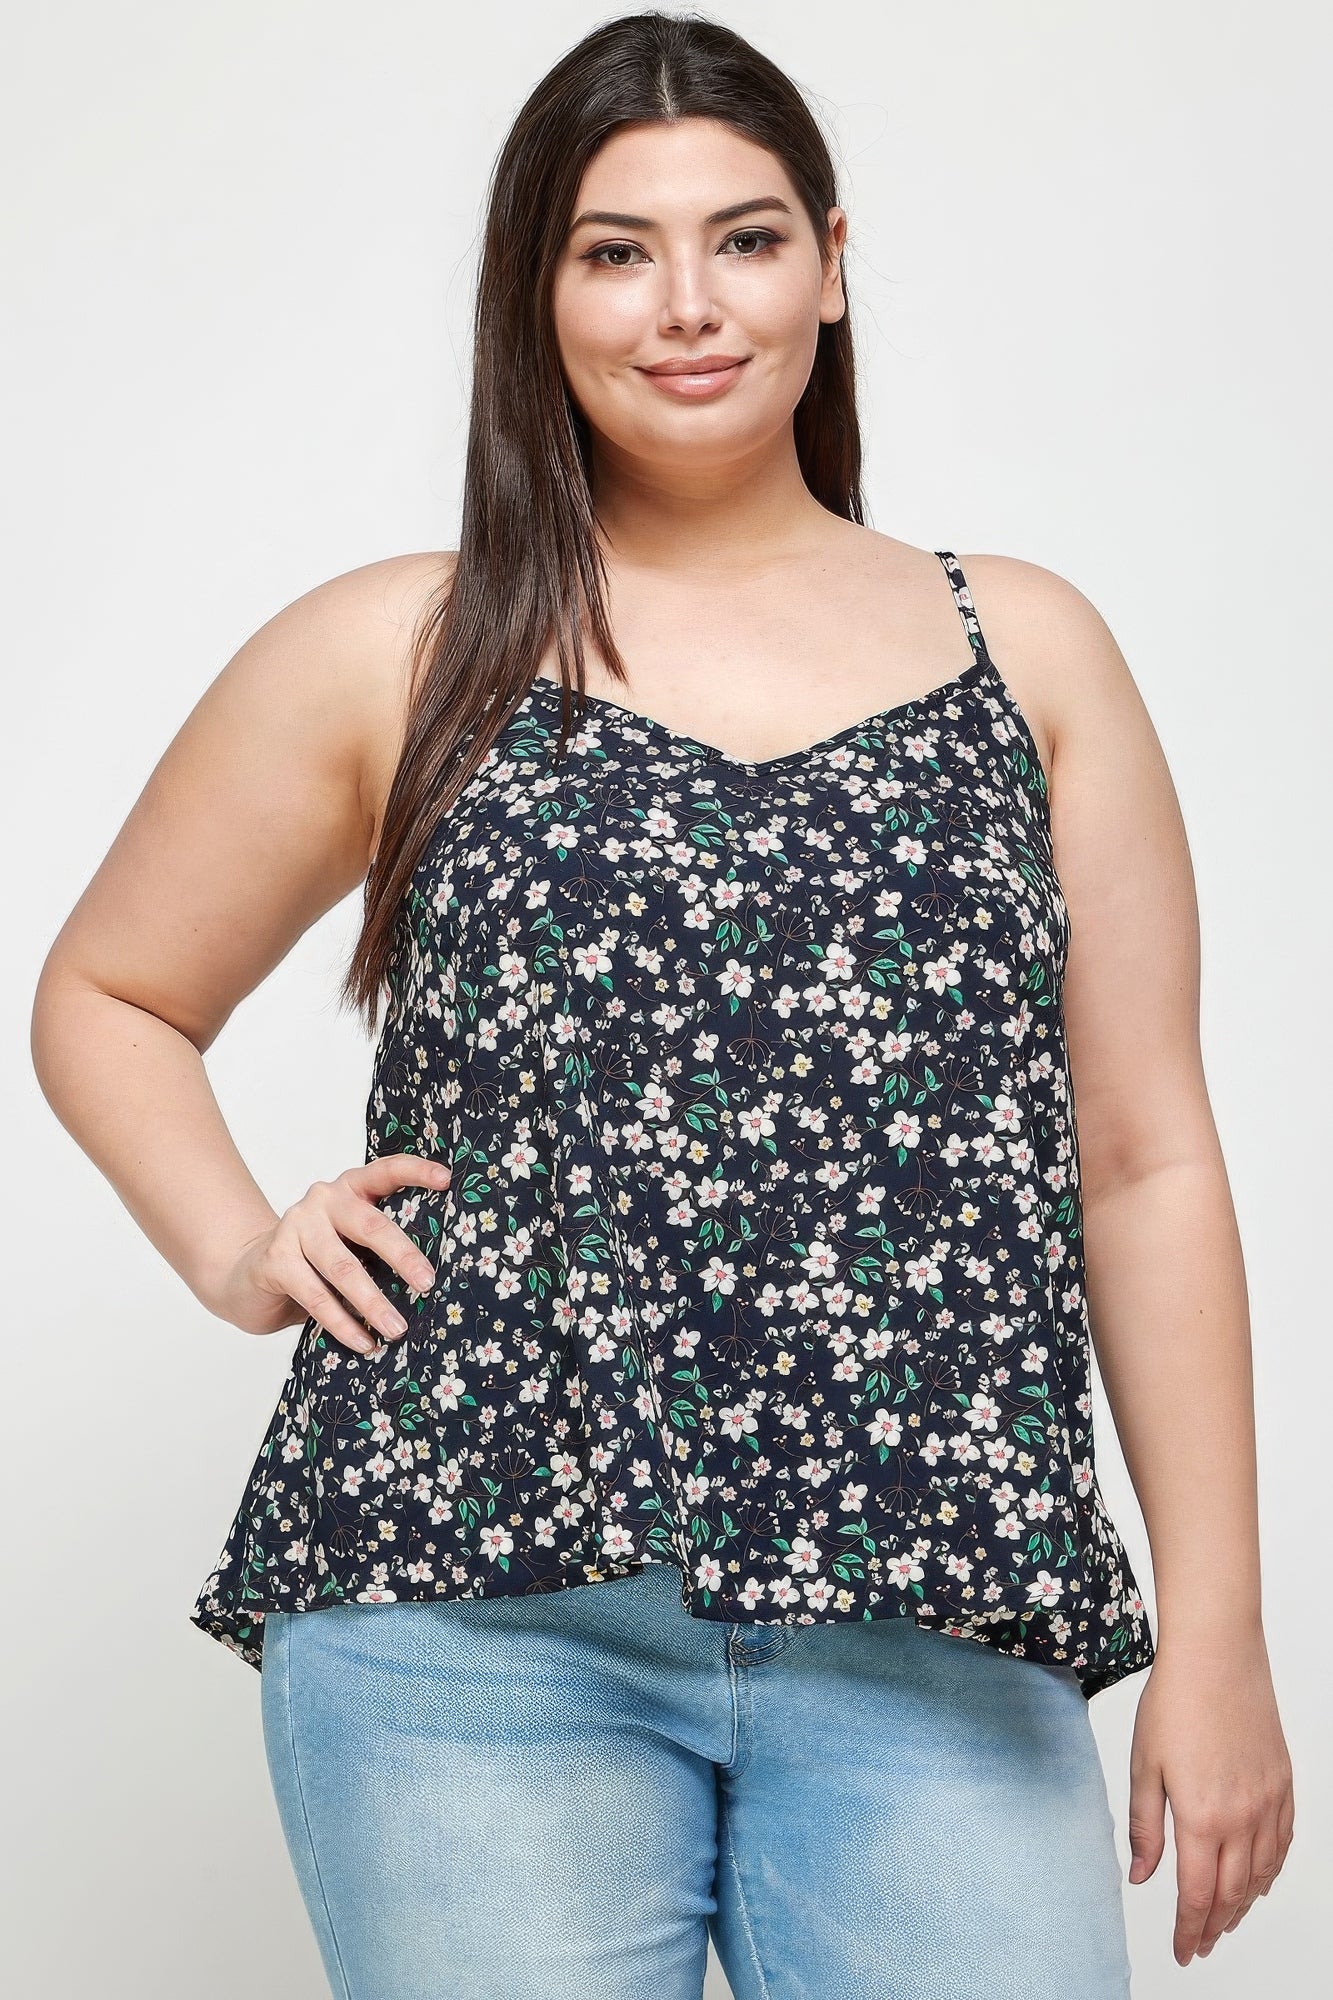 THE HALEY Plus Size, Ditsy Floral Print Cami Top